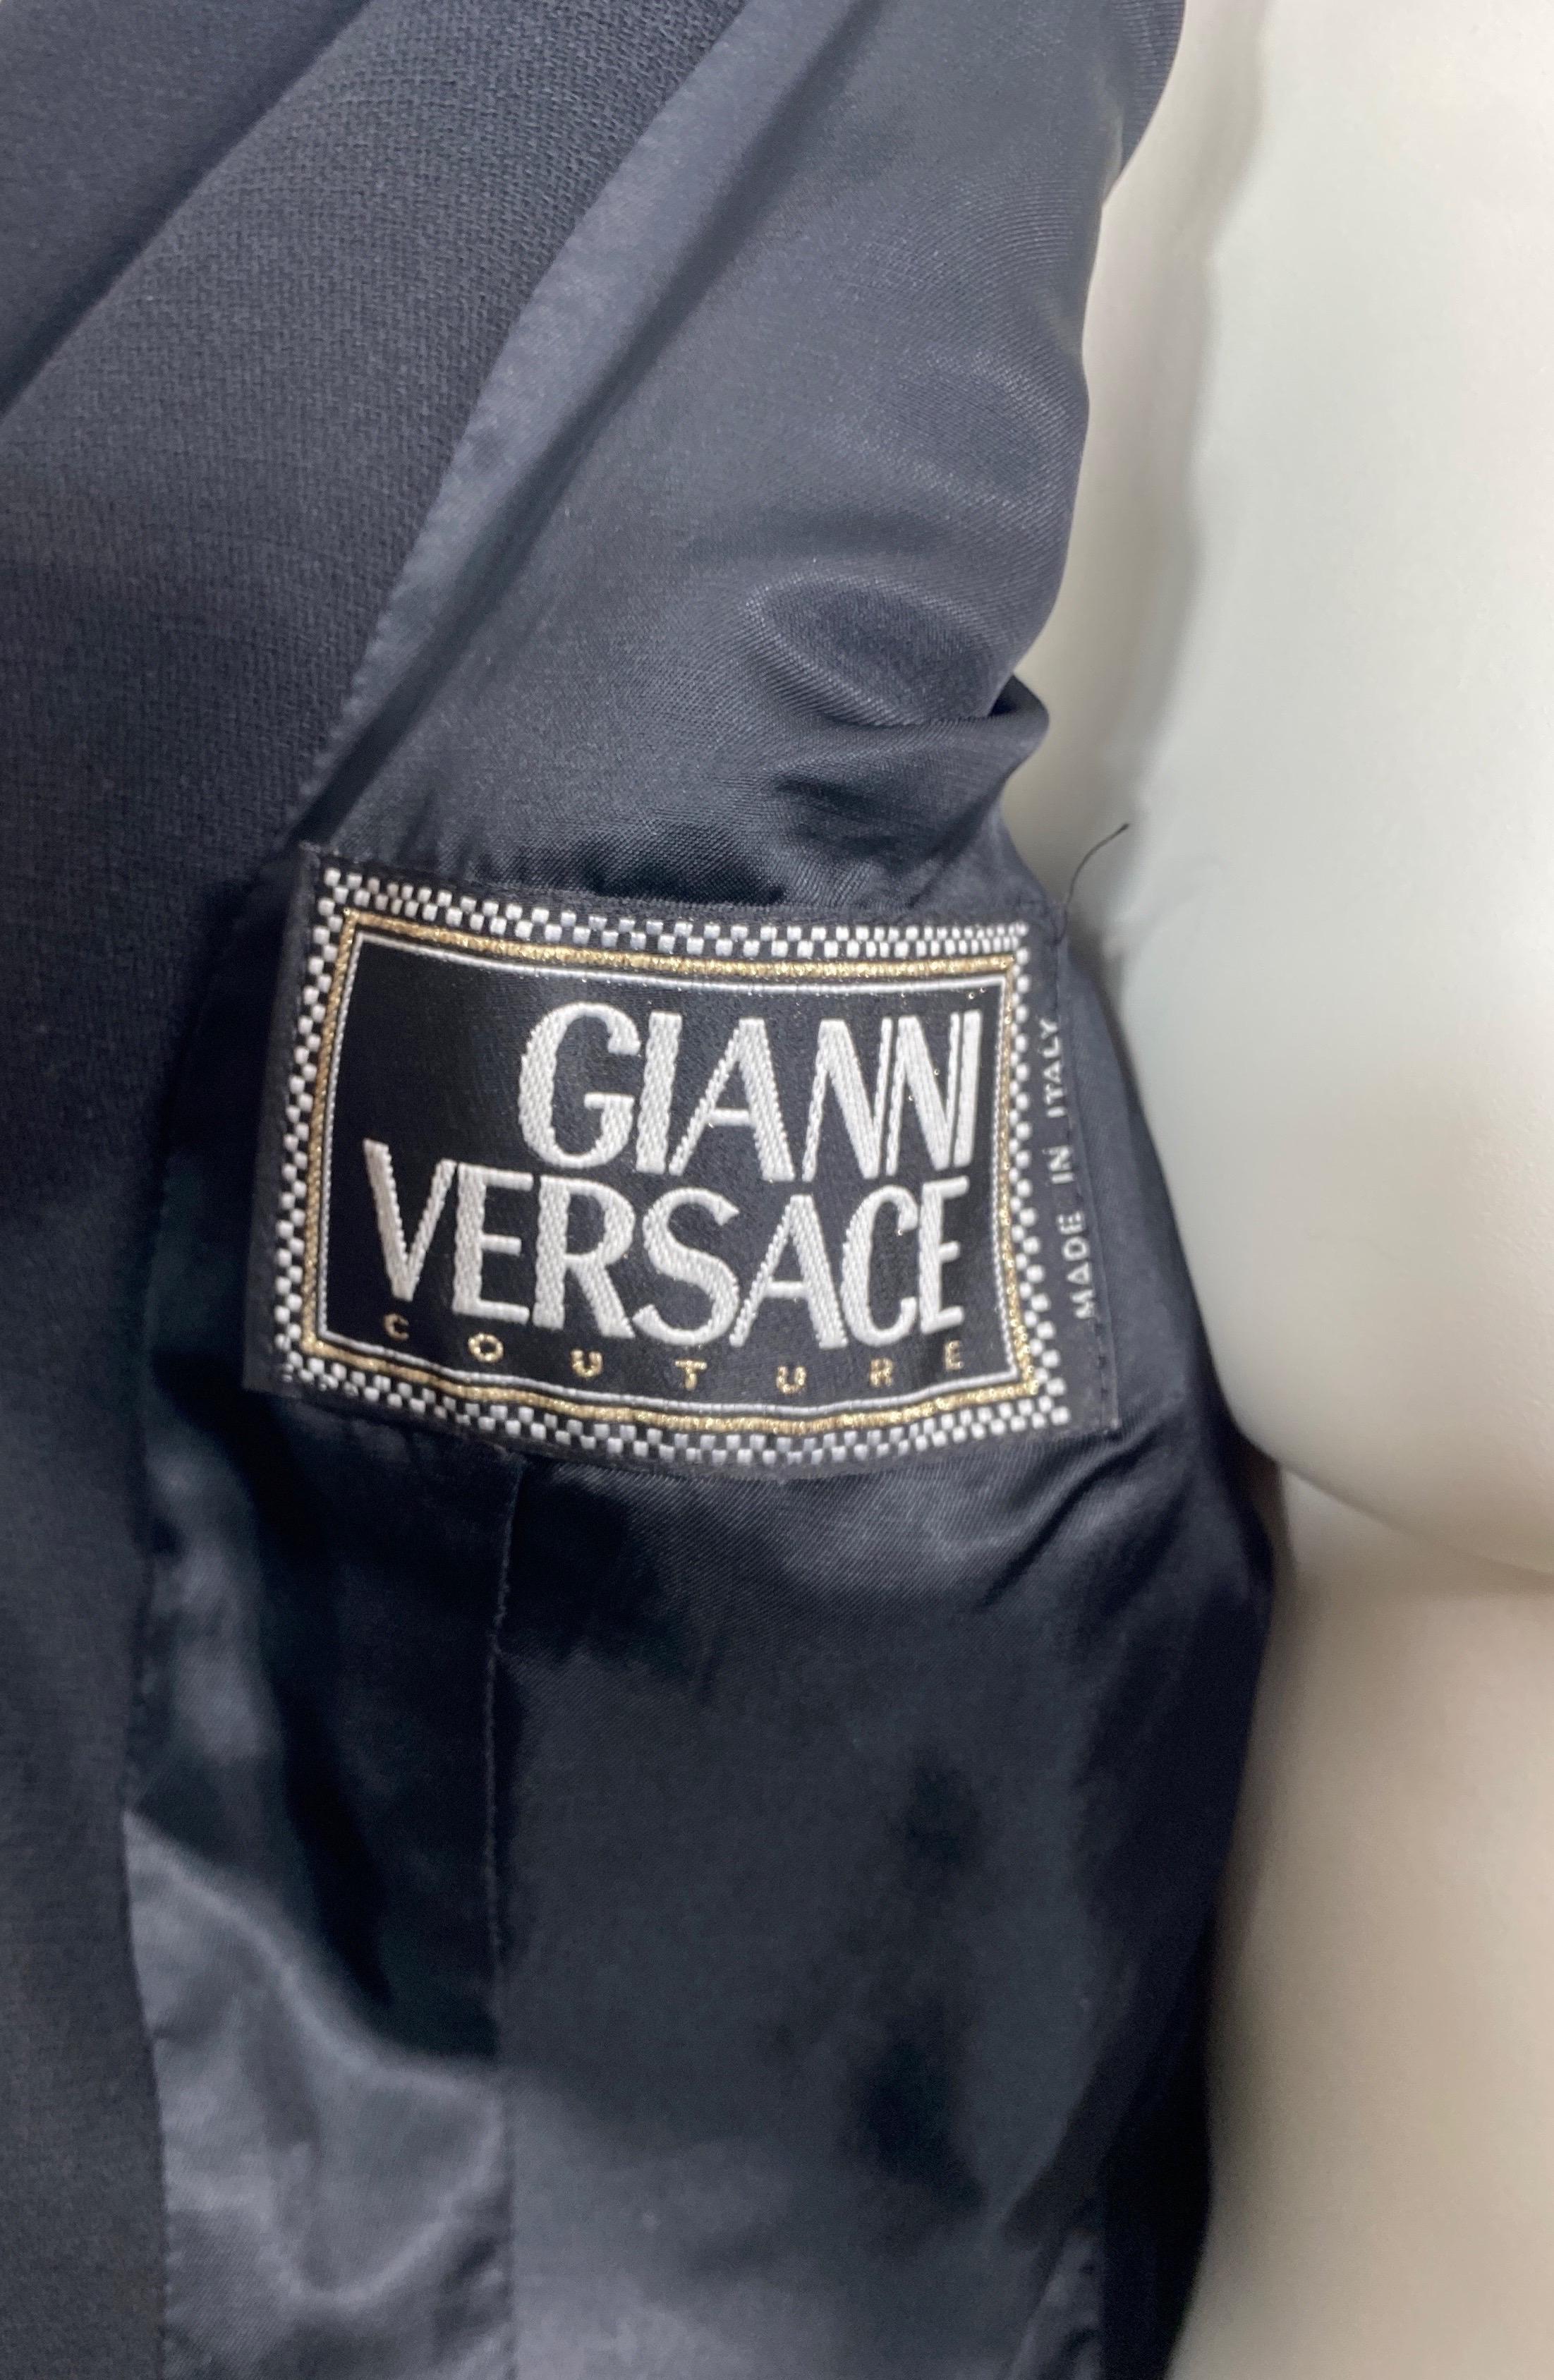 Gianni Versace Couture F/W 1992 Runway S&M Bondage Black Jacket-Size 6 For Sale 8